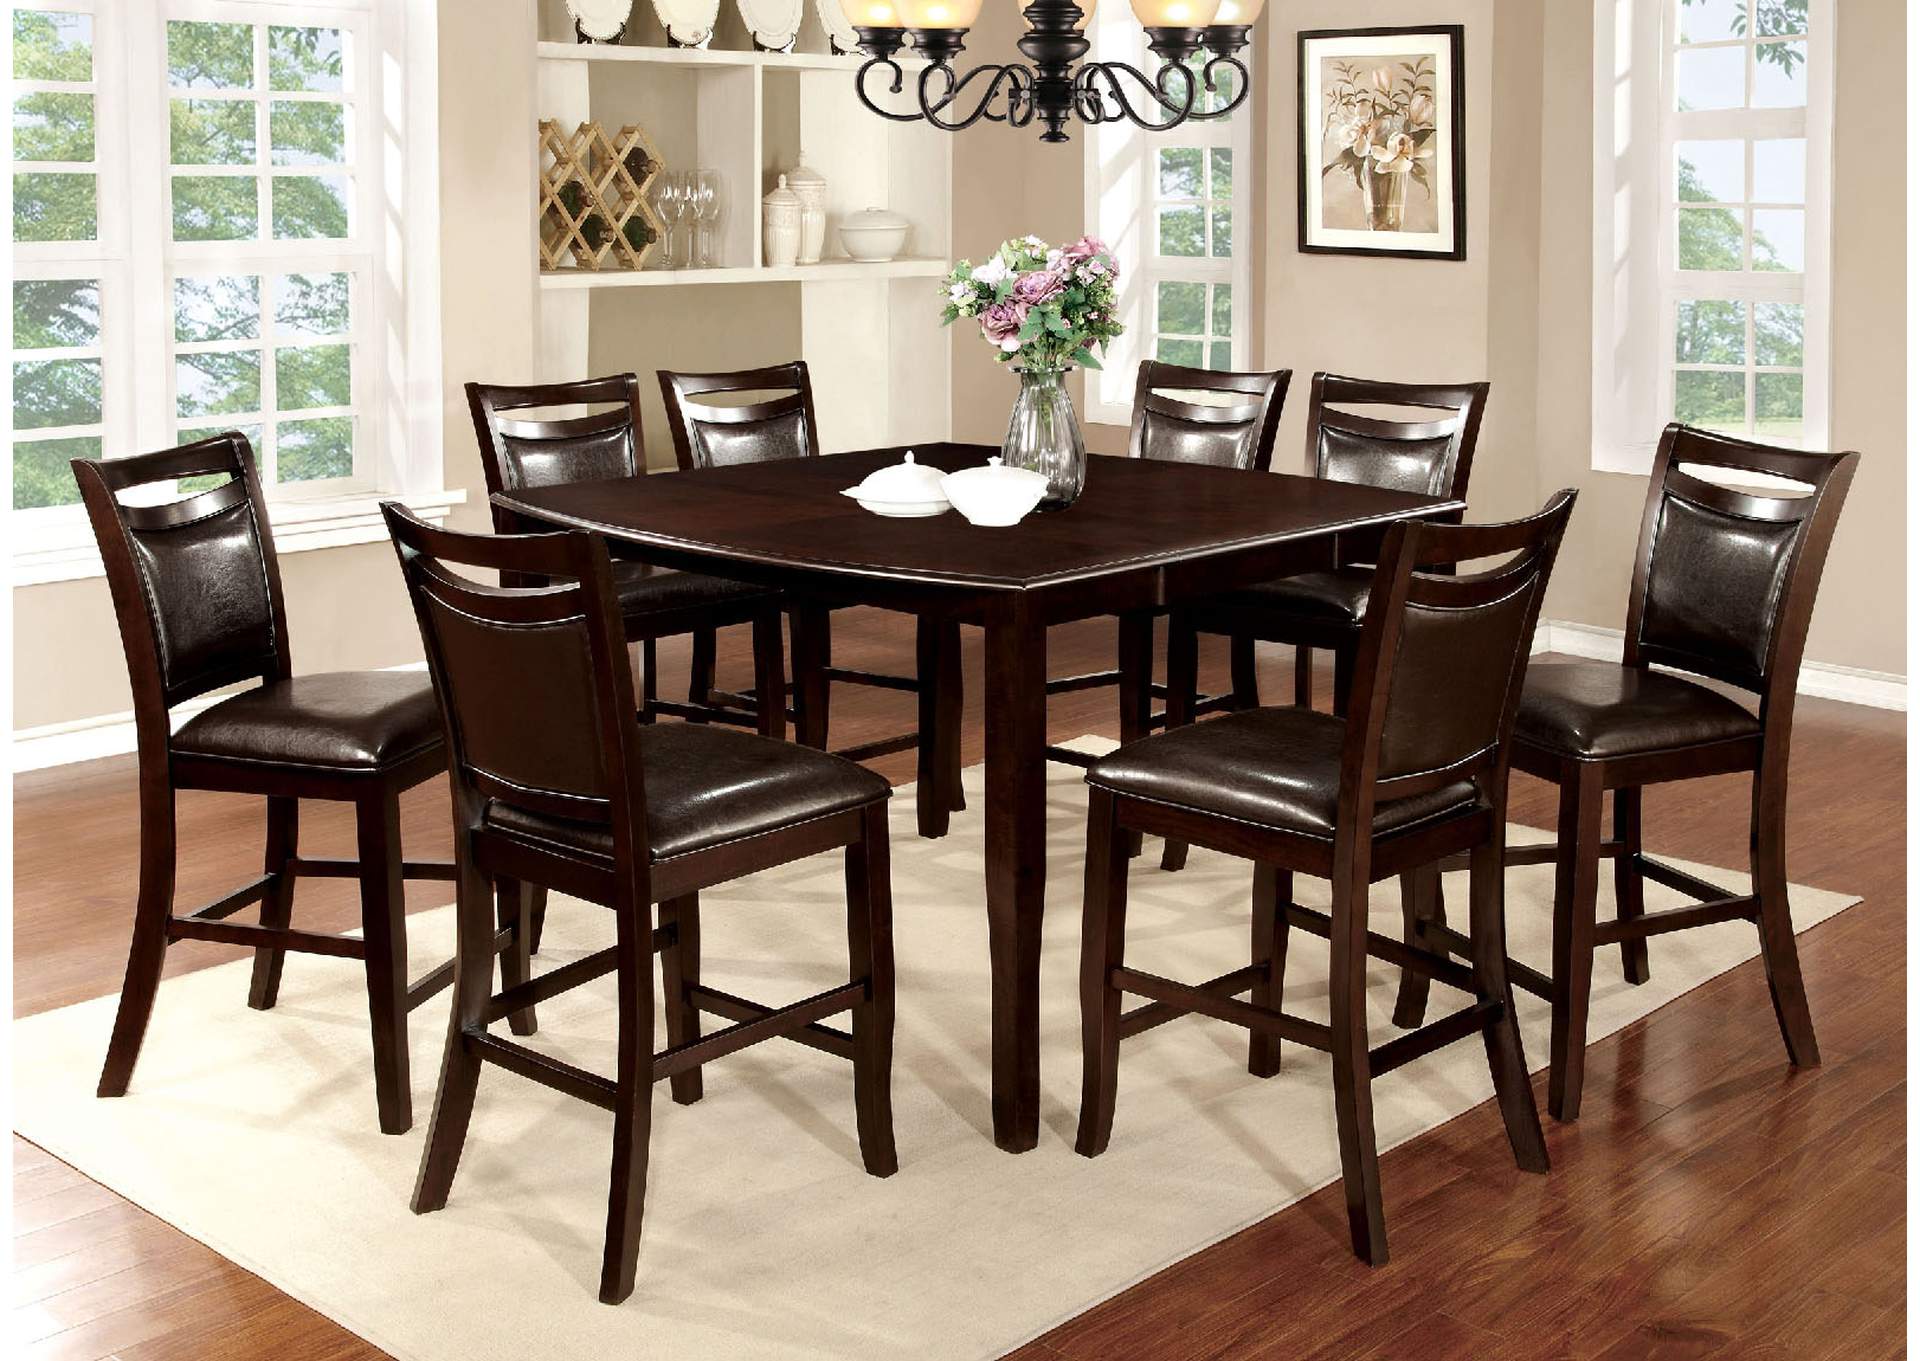 Woodside II Espresso Counter Height Table w/6 Counter Height Chairs,Furniture of America TX